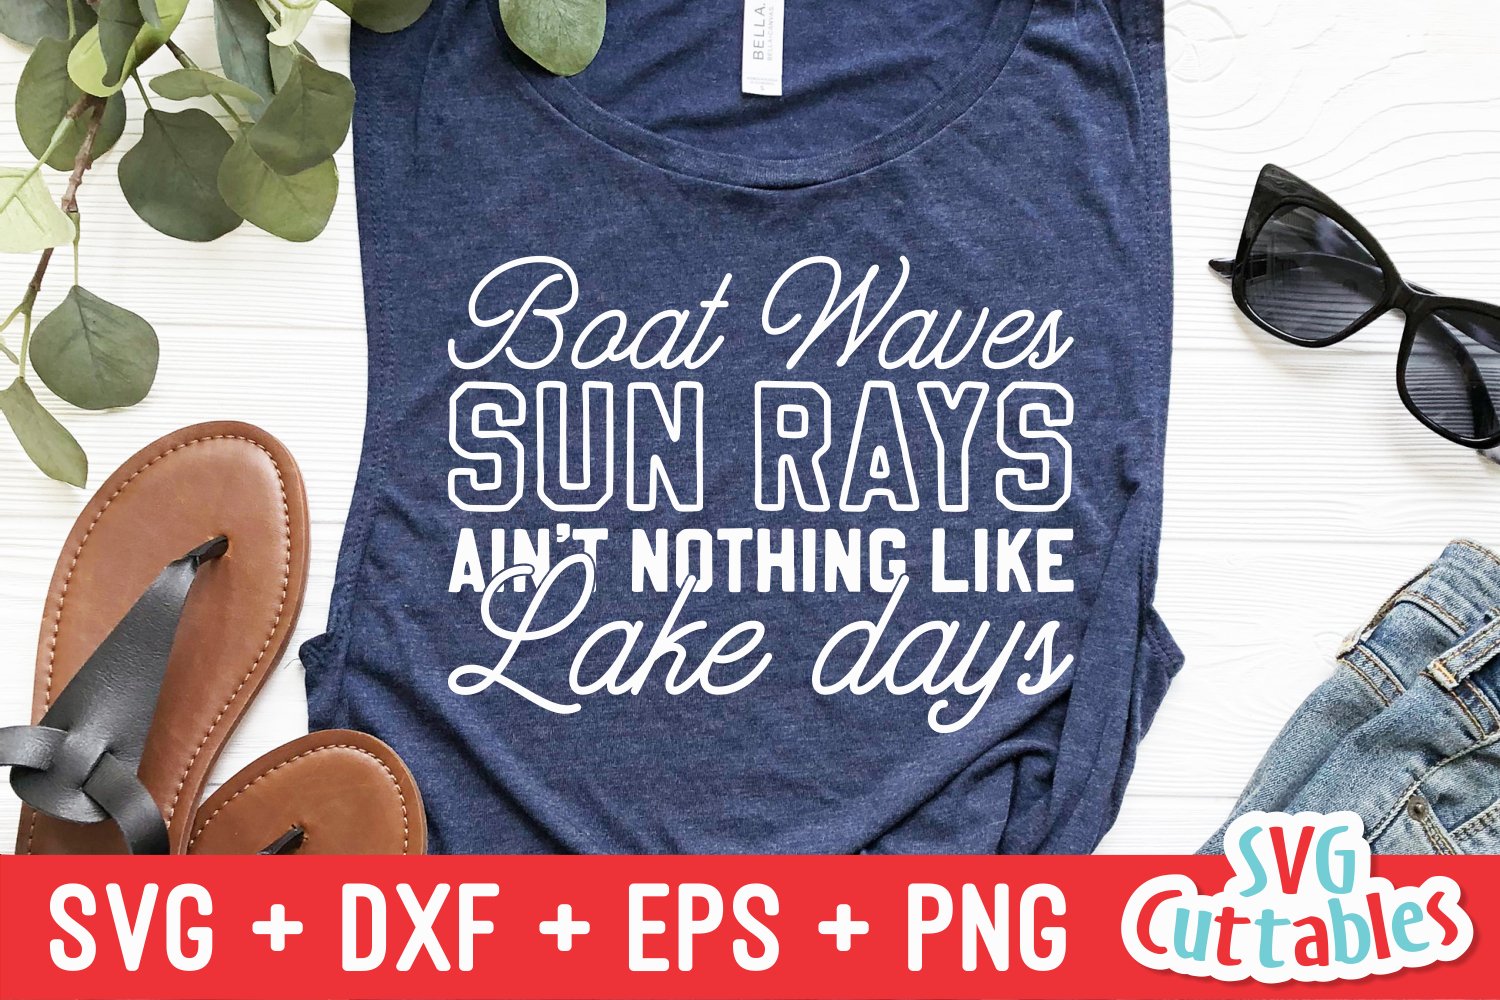 T-shirt design with lake days vibes.